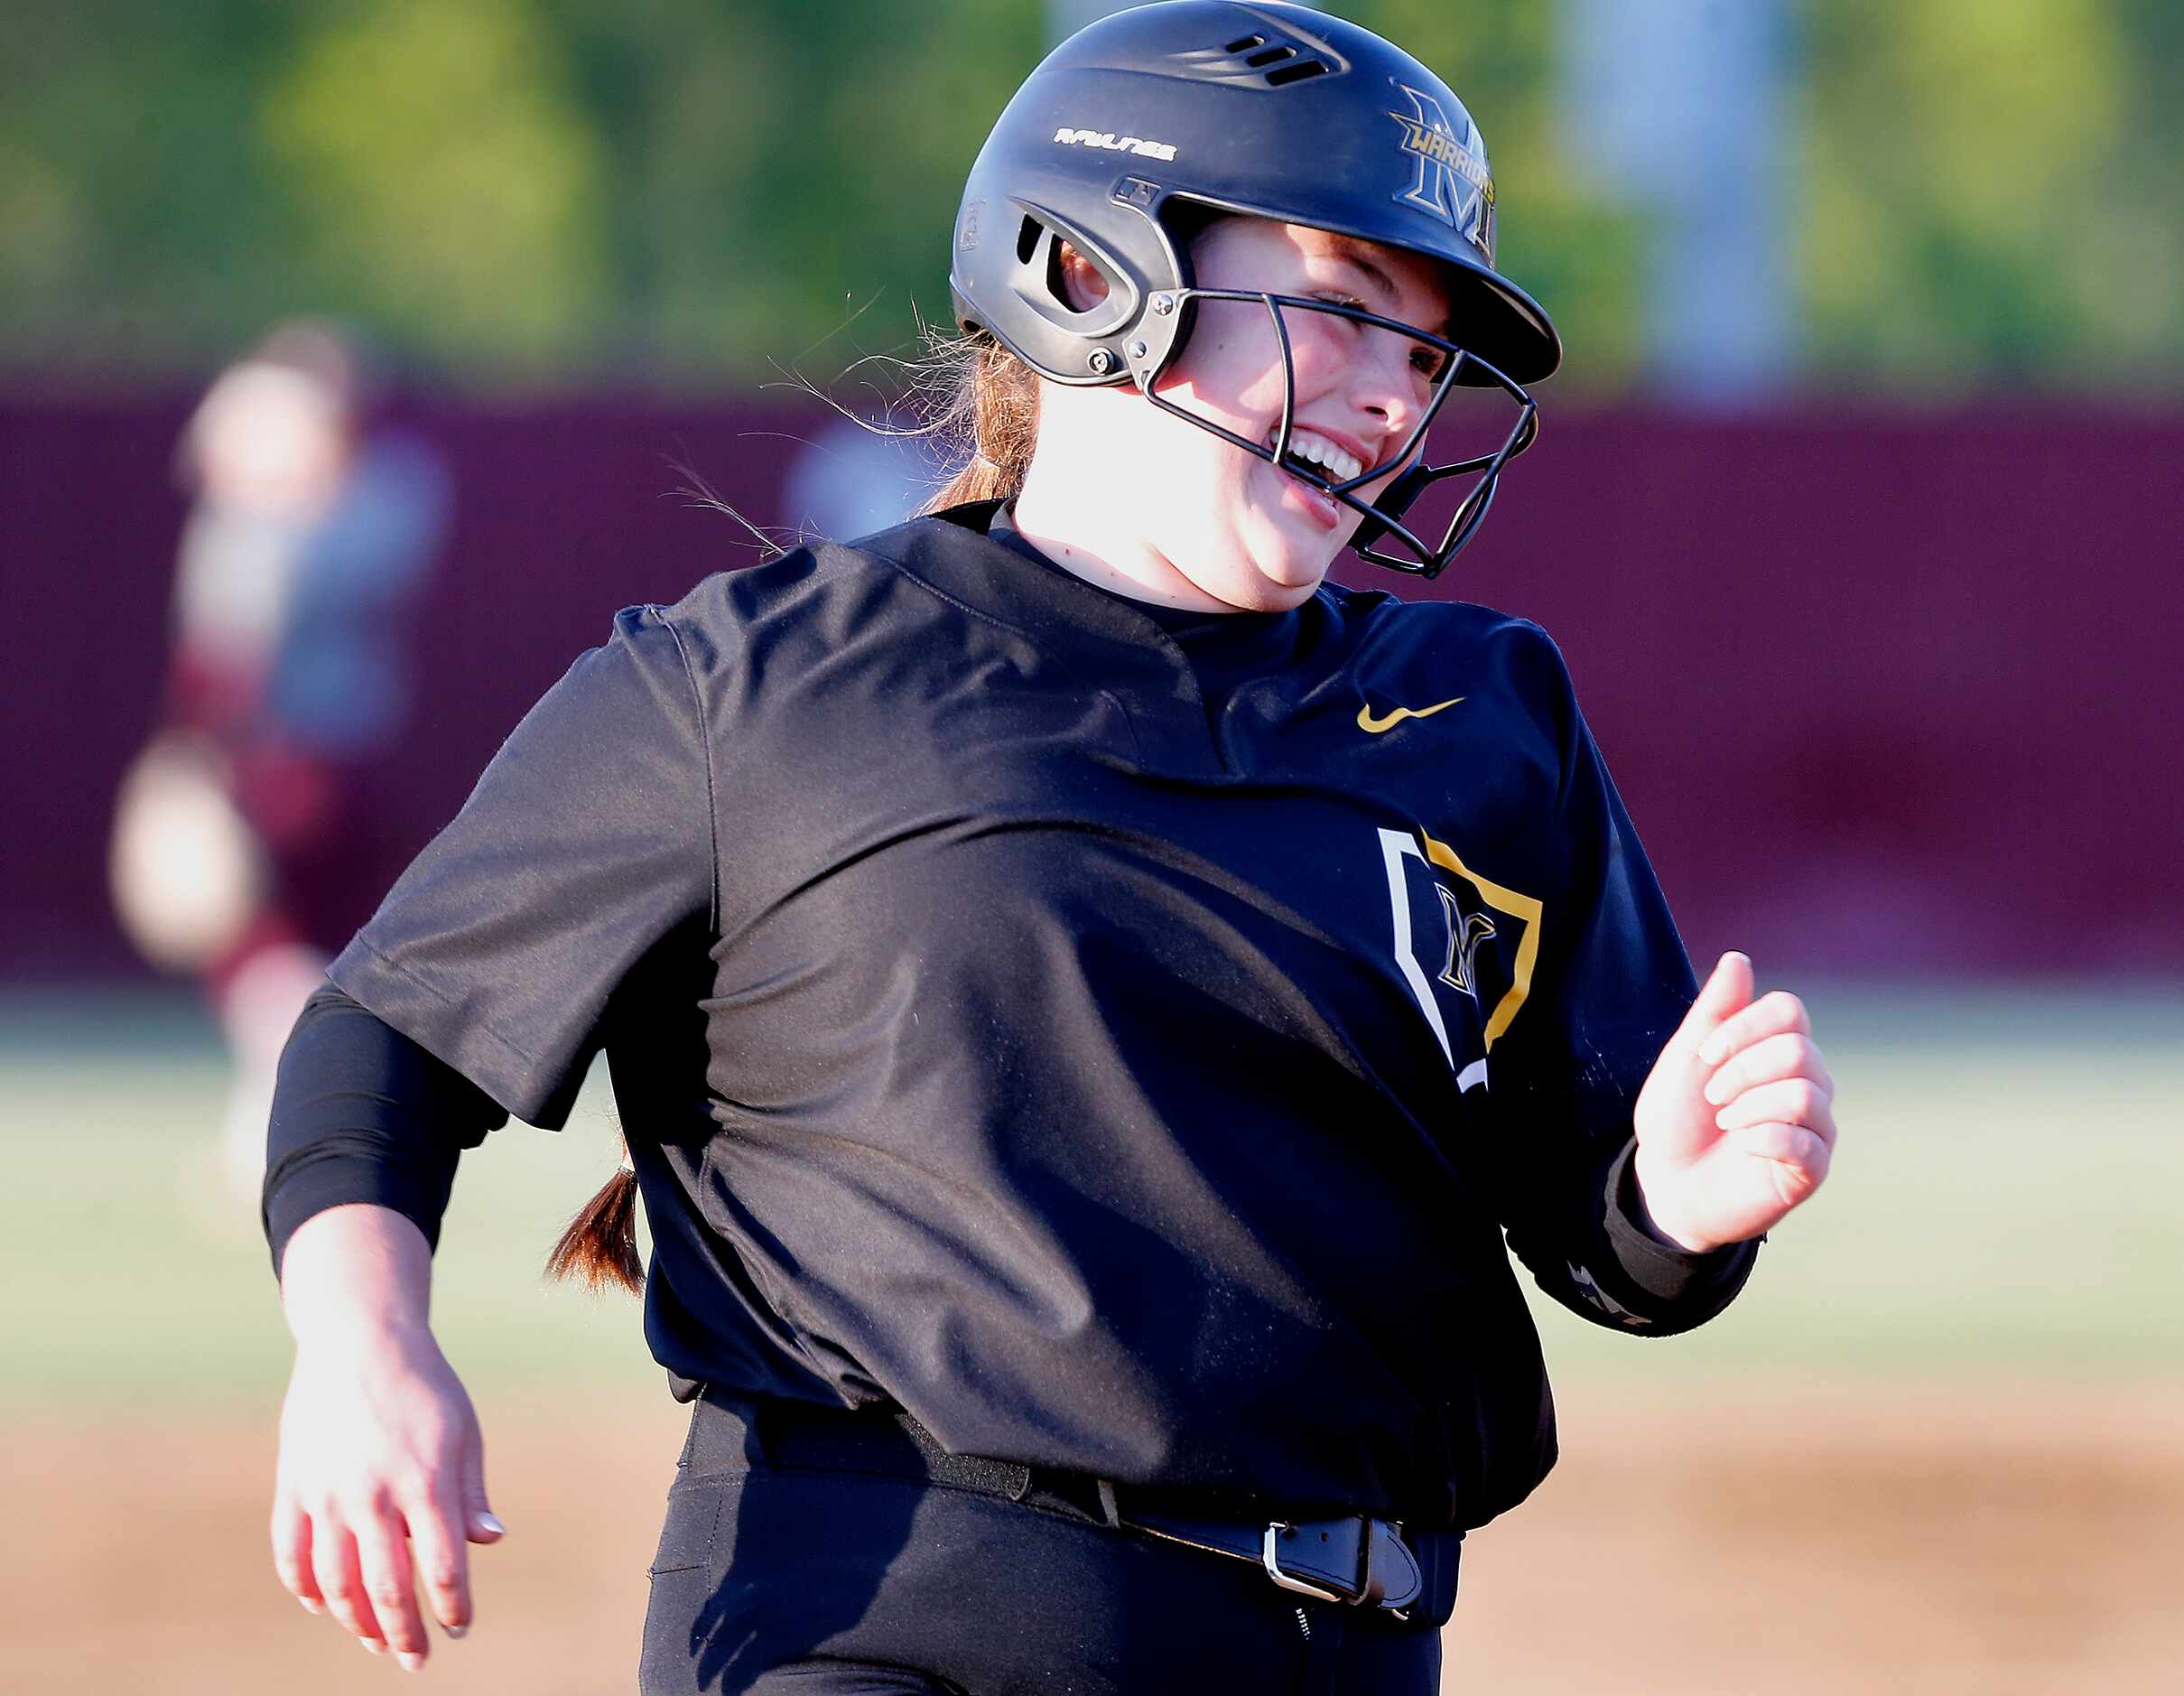 Memorial’s first baseman Peyton Chianese (27) was all smiles as she rounded third base and...